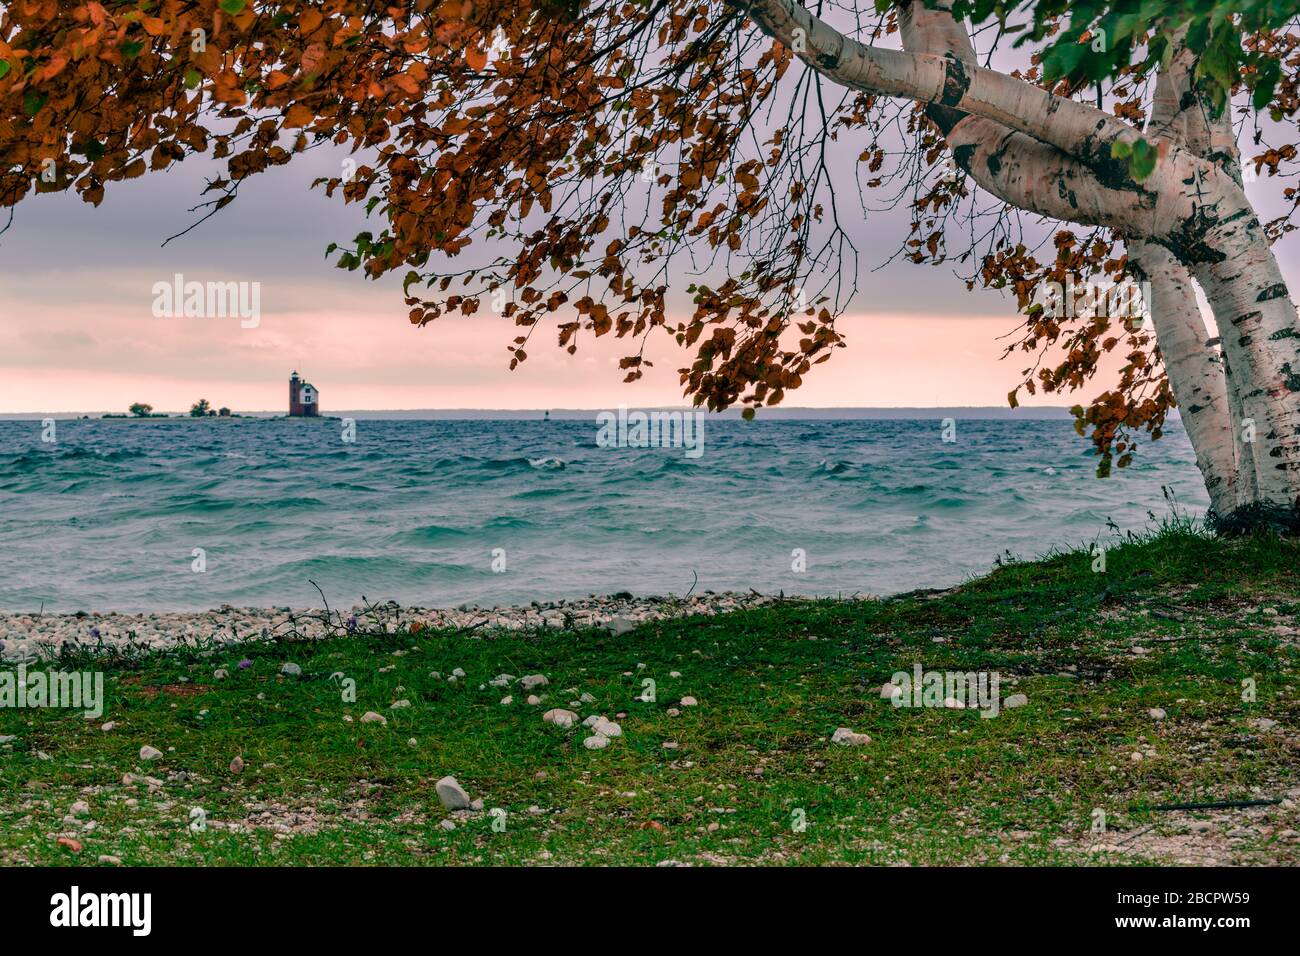 Looking under a birch tree at Round Island Lighthouse from Mackinac Island Stock Photo